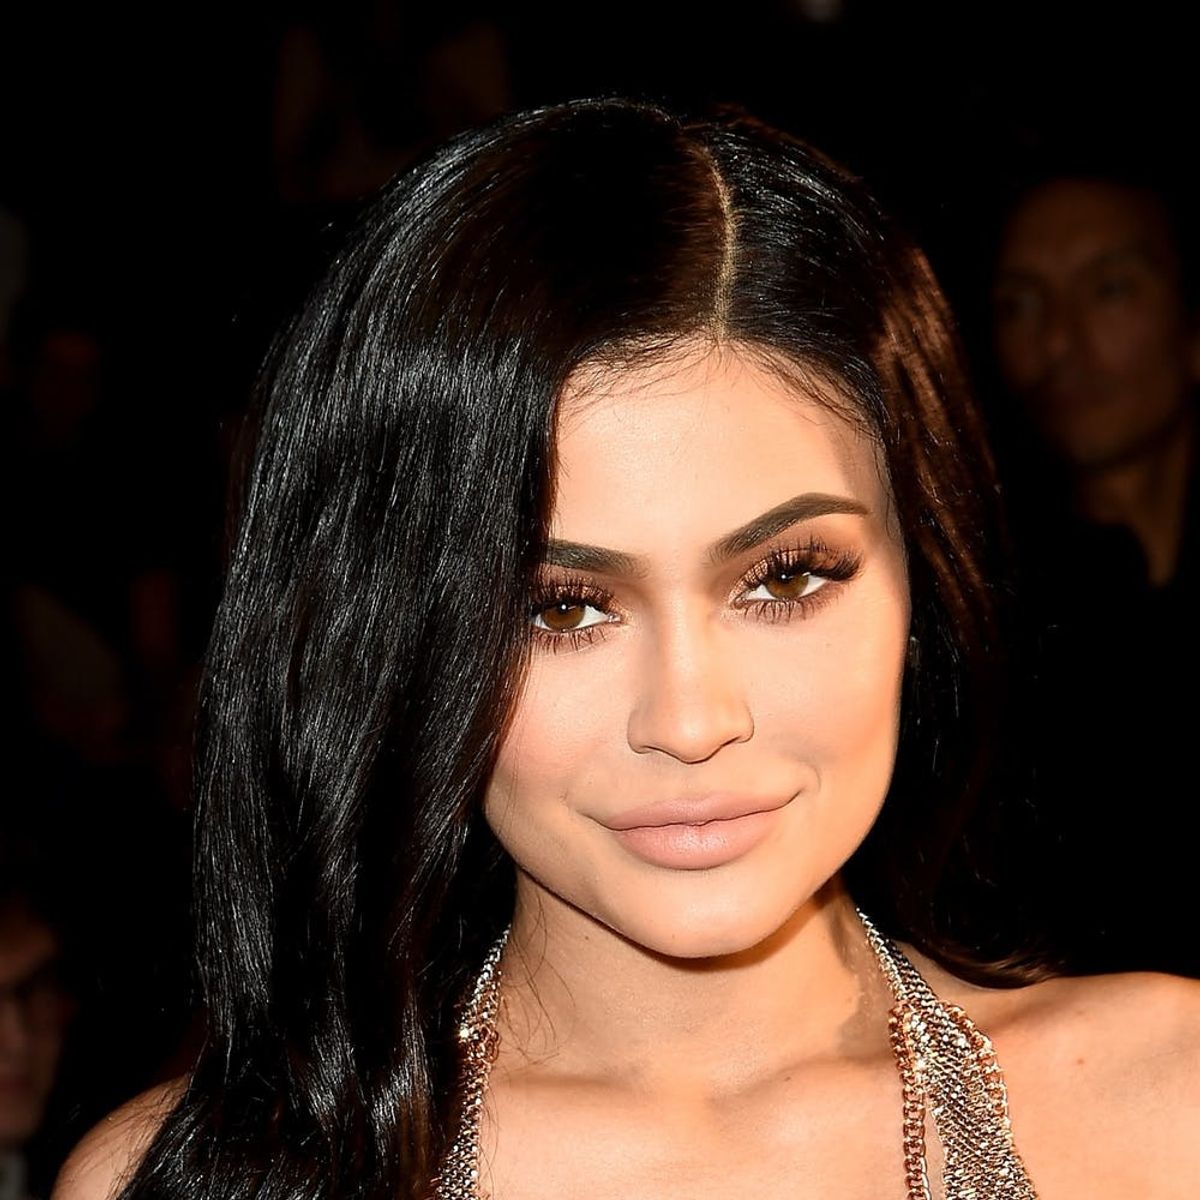 Kylie Jenner Defends The Price of Her $360 Makeup Brushes